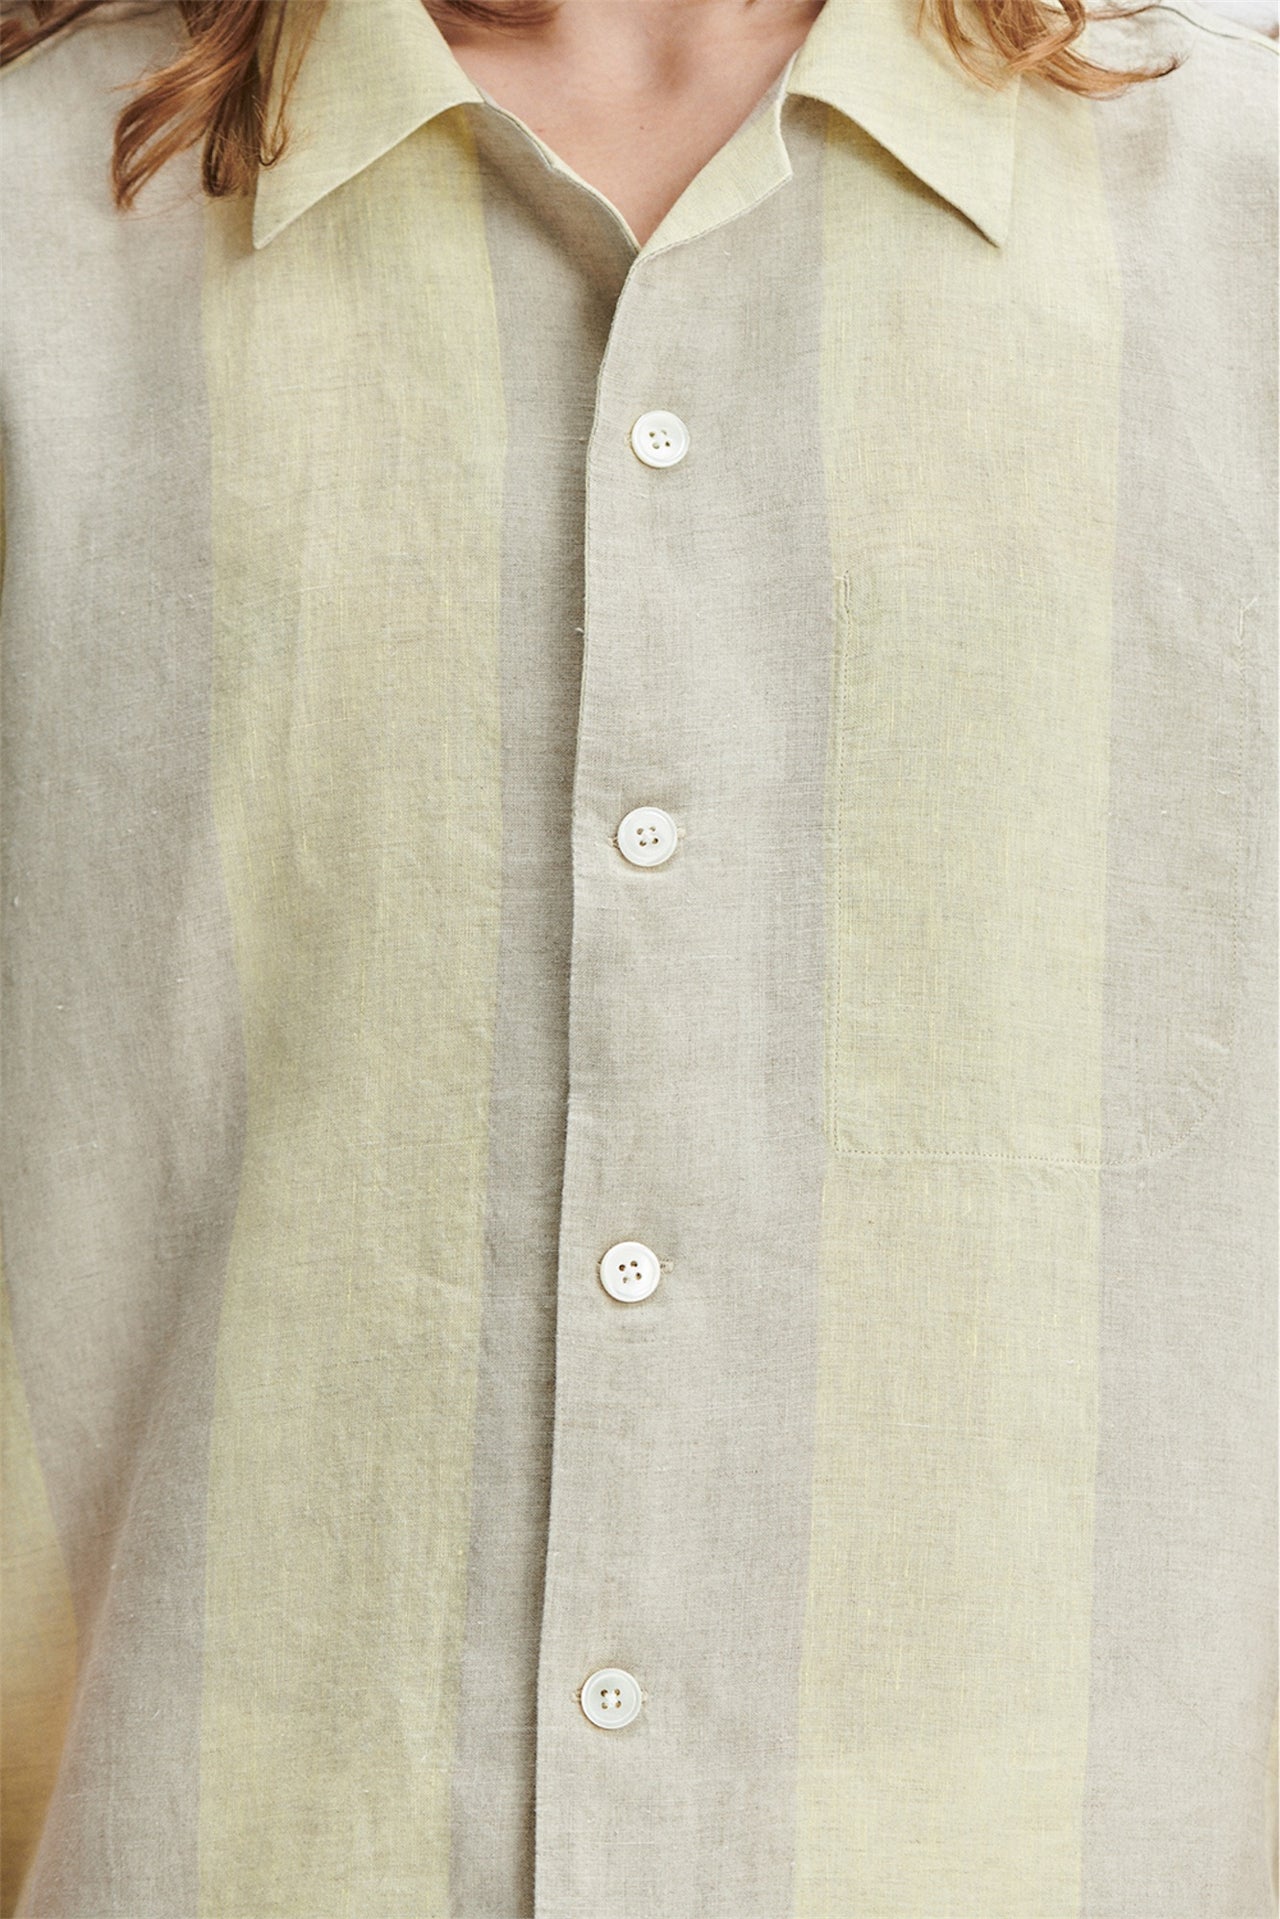 Short Sleeve Cuban Collar Shirt in Yellow and Beige Striped Superb Italian Traceable Linen - On-line Exclusive